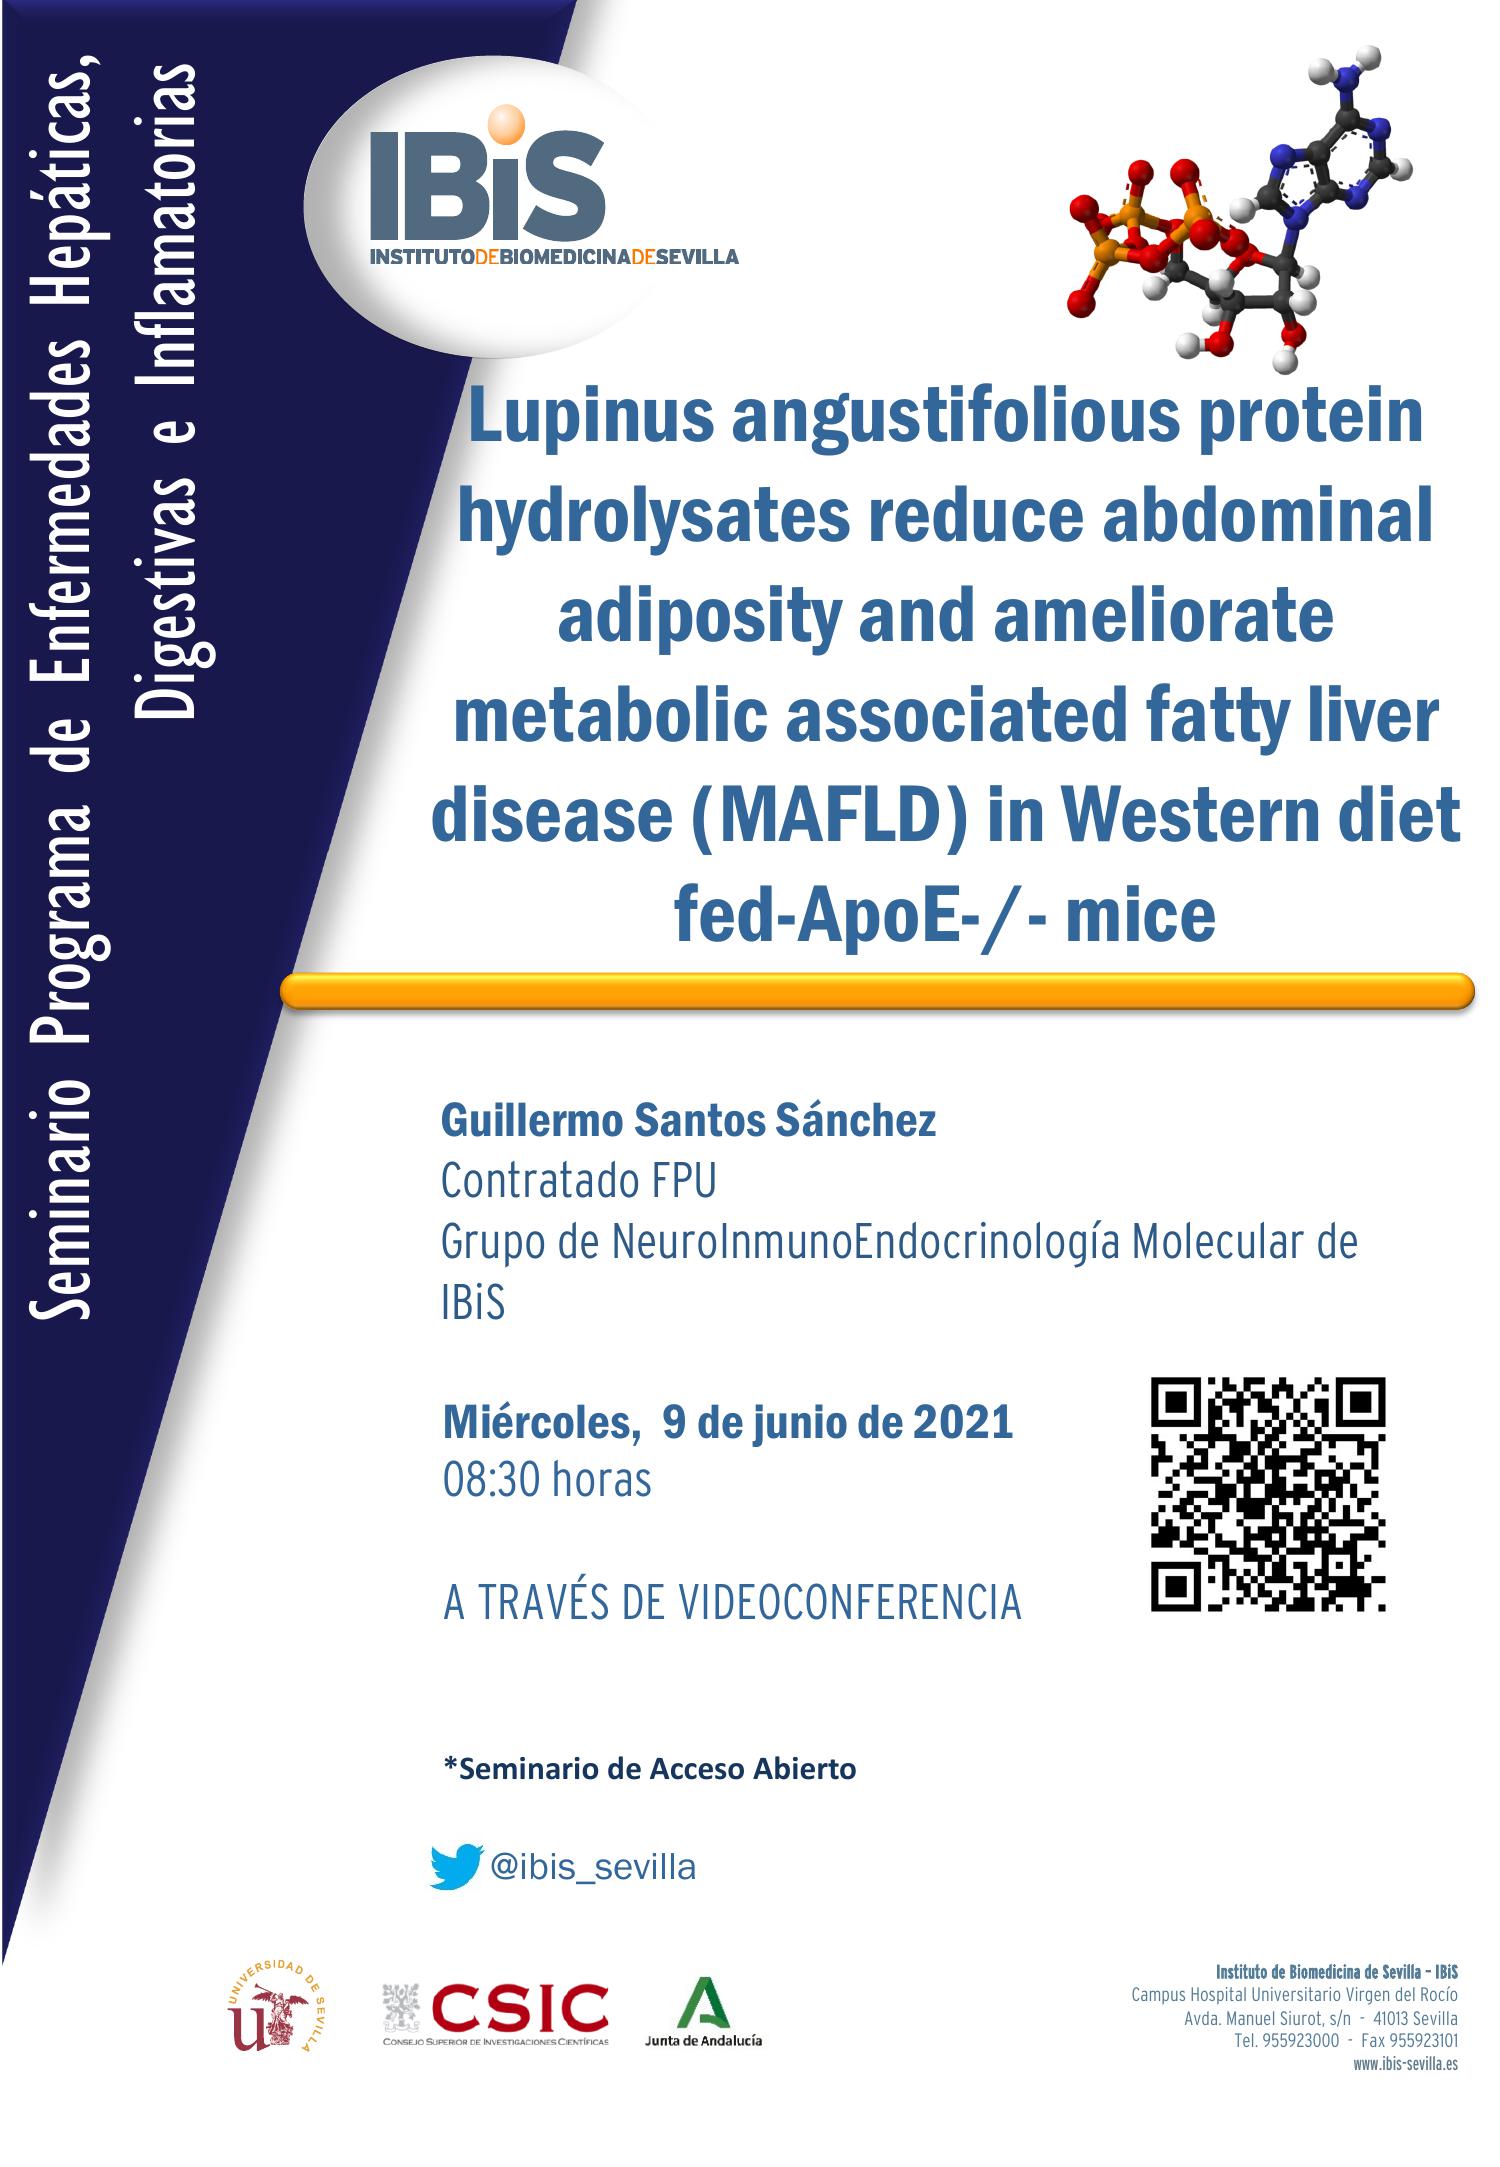 Poster: Lupinus angustifolious protein hydrolysates reduce abdominal adiposity and ameliorate metabolic associated fatty liver disease (MAFLD) in Western diet fed-ApoE-/- mice